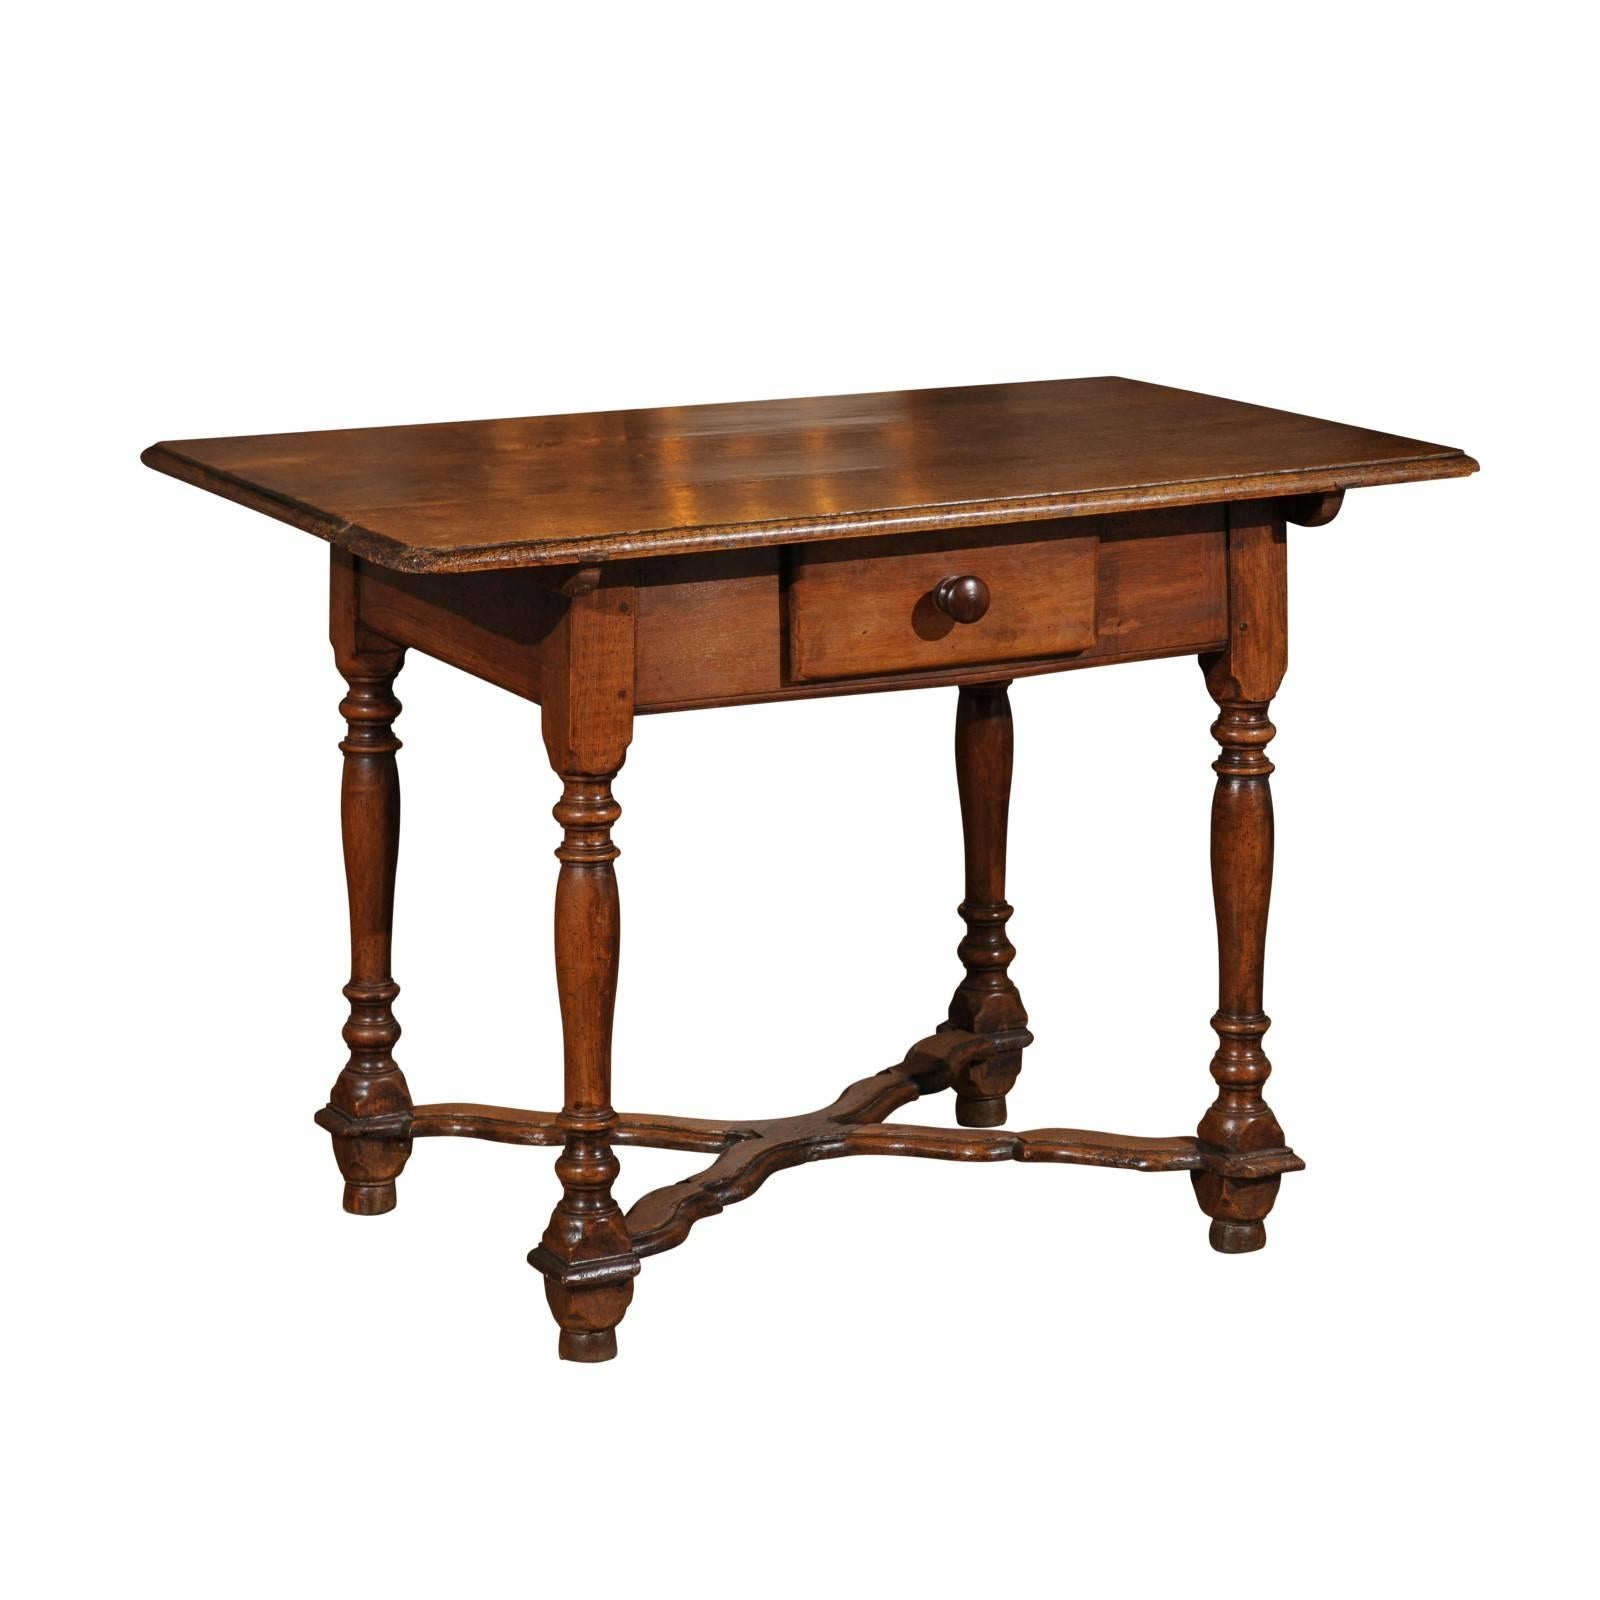 French Late 18th Century Walnut Side Table with X-Form Stretcher and Turned Legs